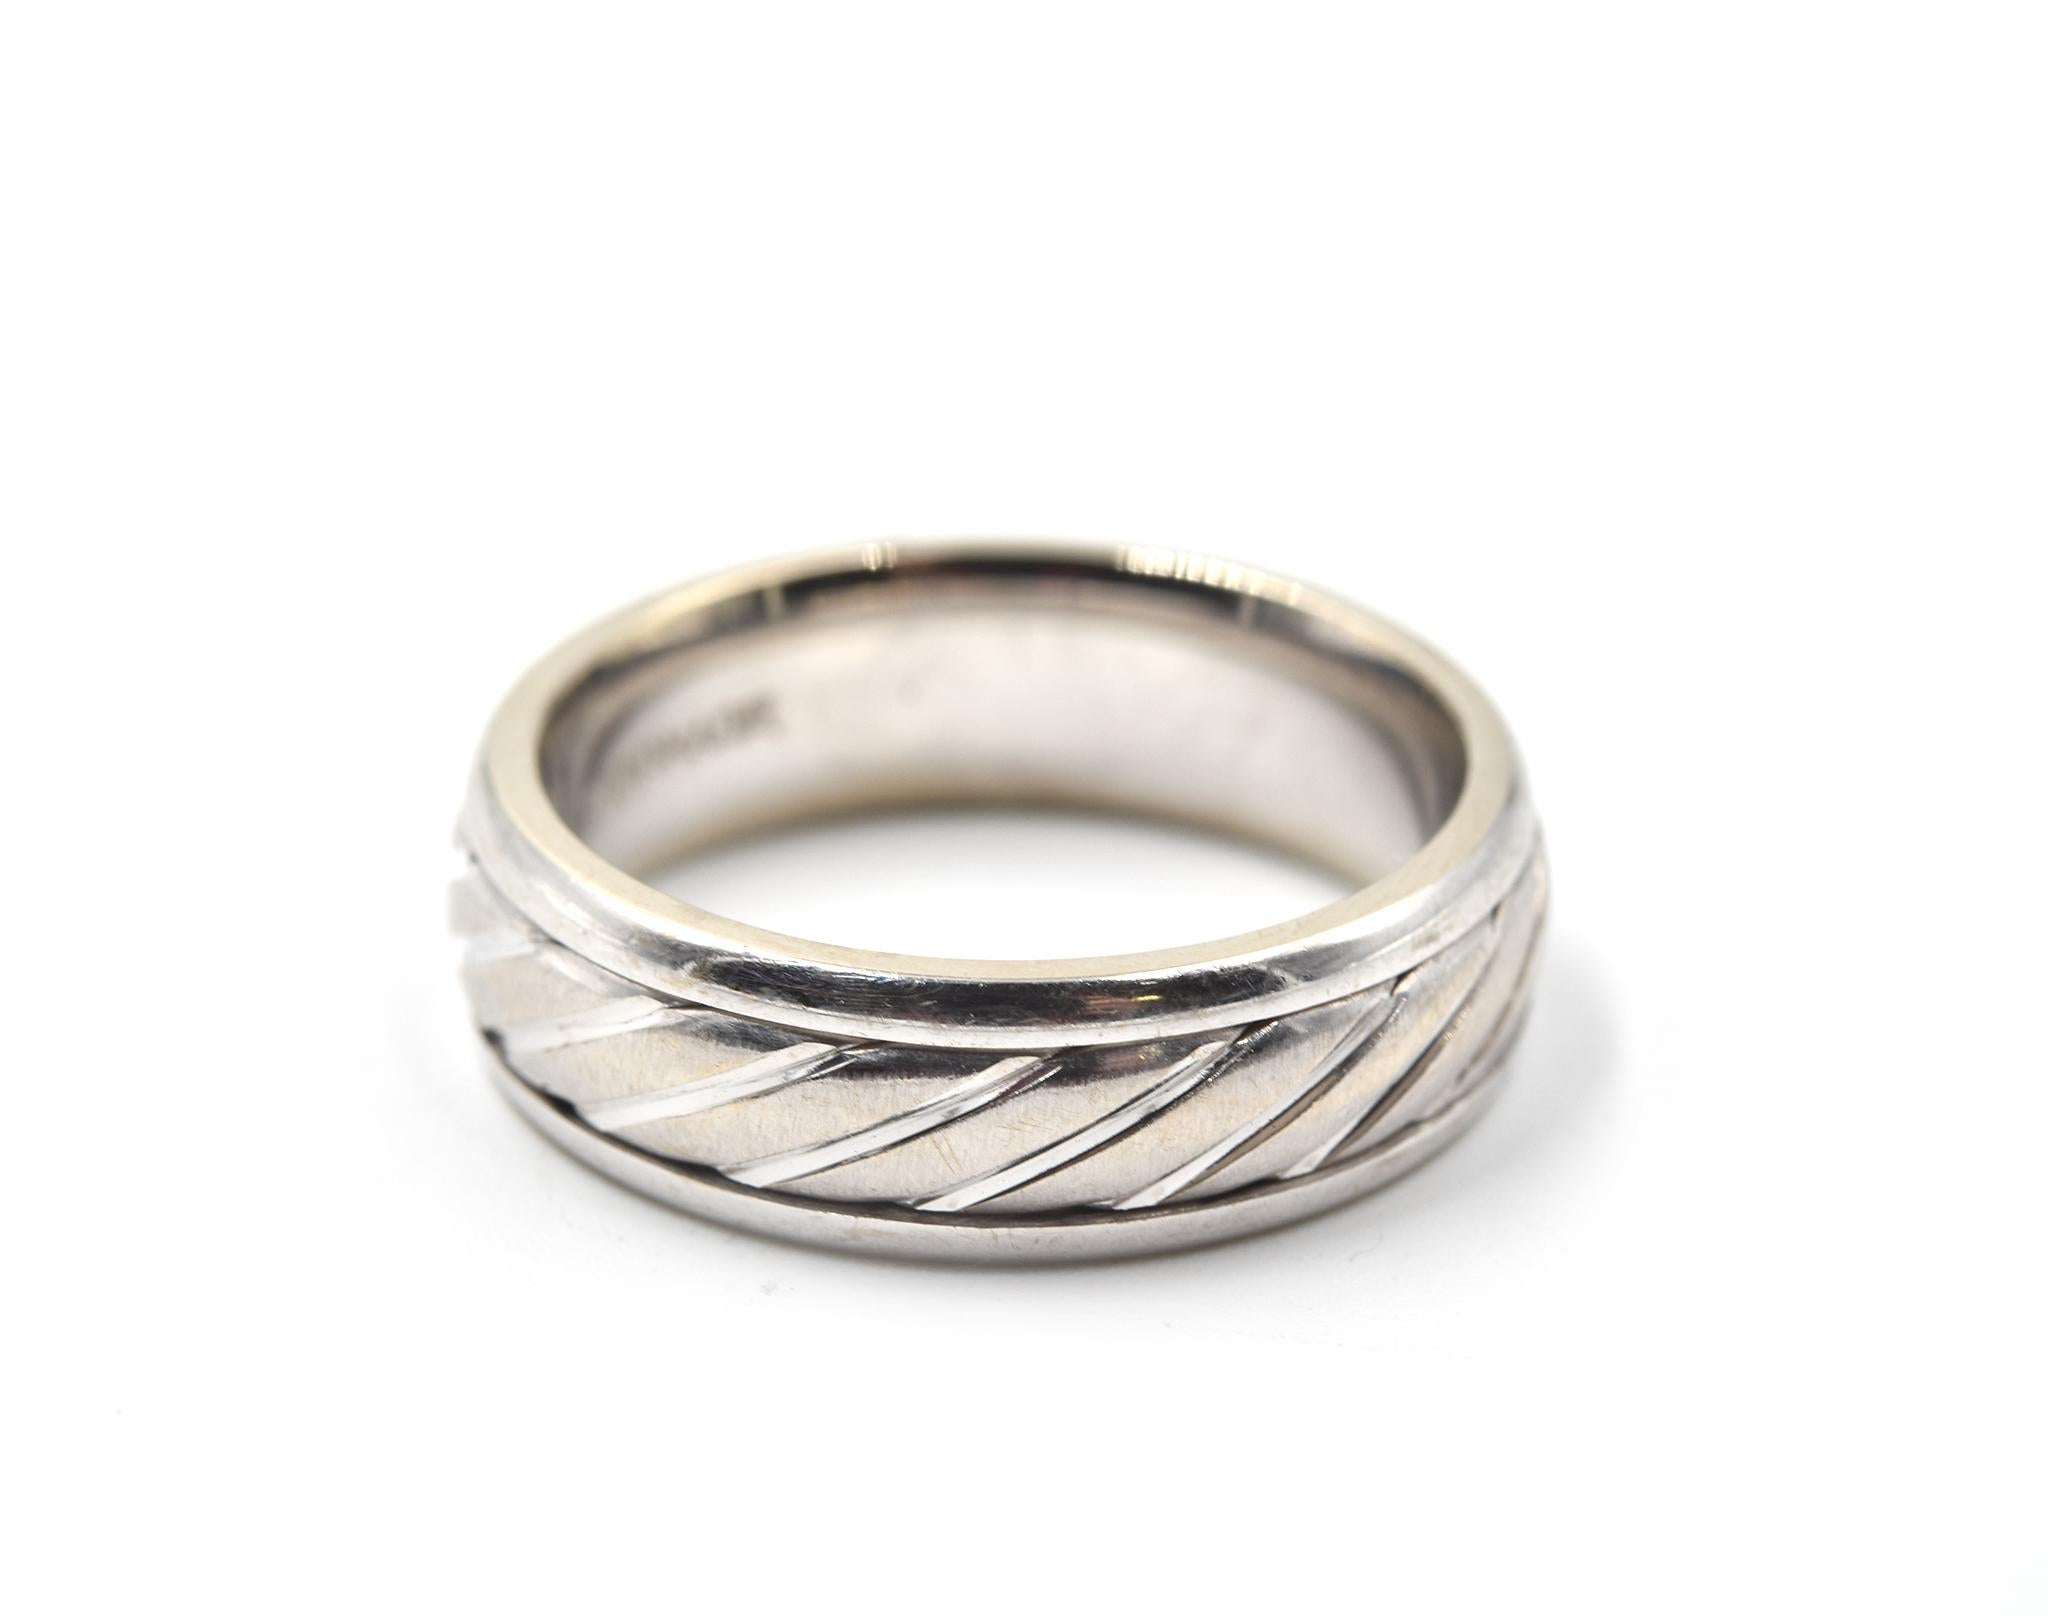 Designer: custom design
Material: 14k white gold
Dimensions: ring is 6.75mm wide
Ring Size: 9 ¾ 
Weight: 11.45 grams
